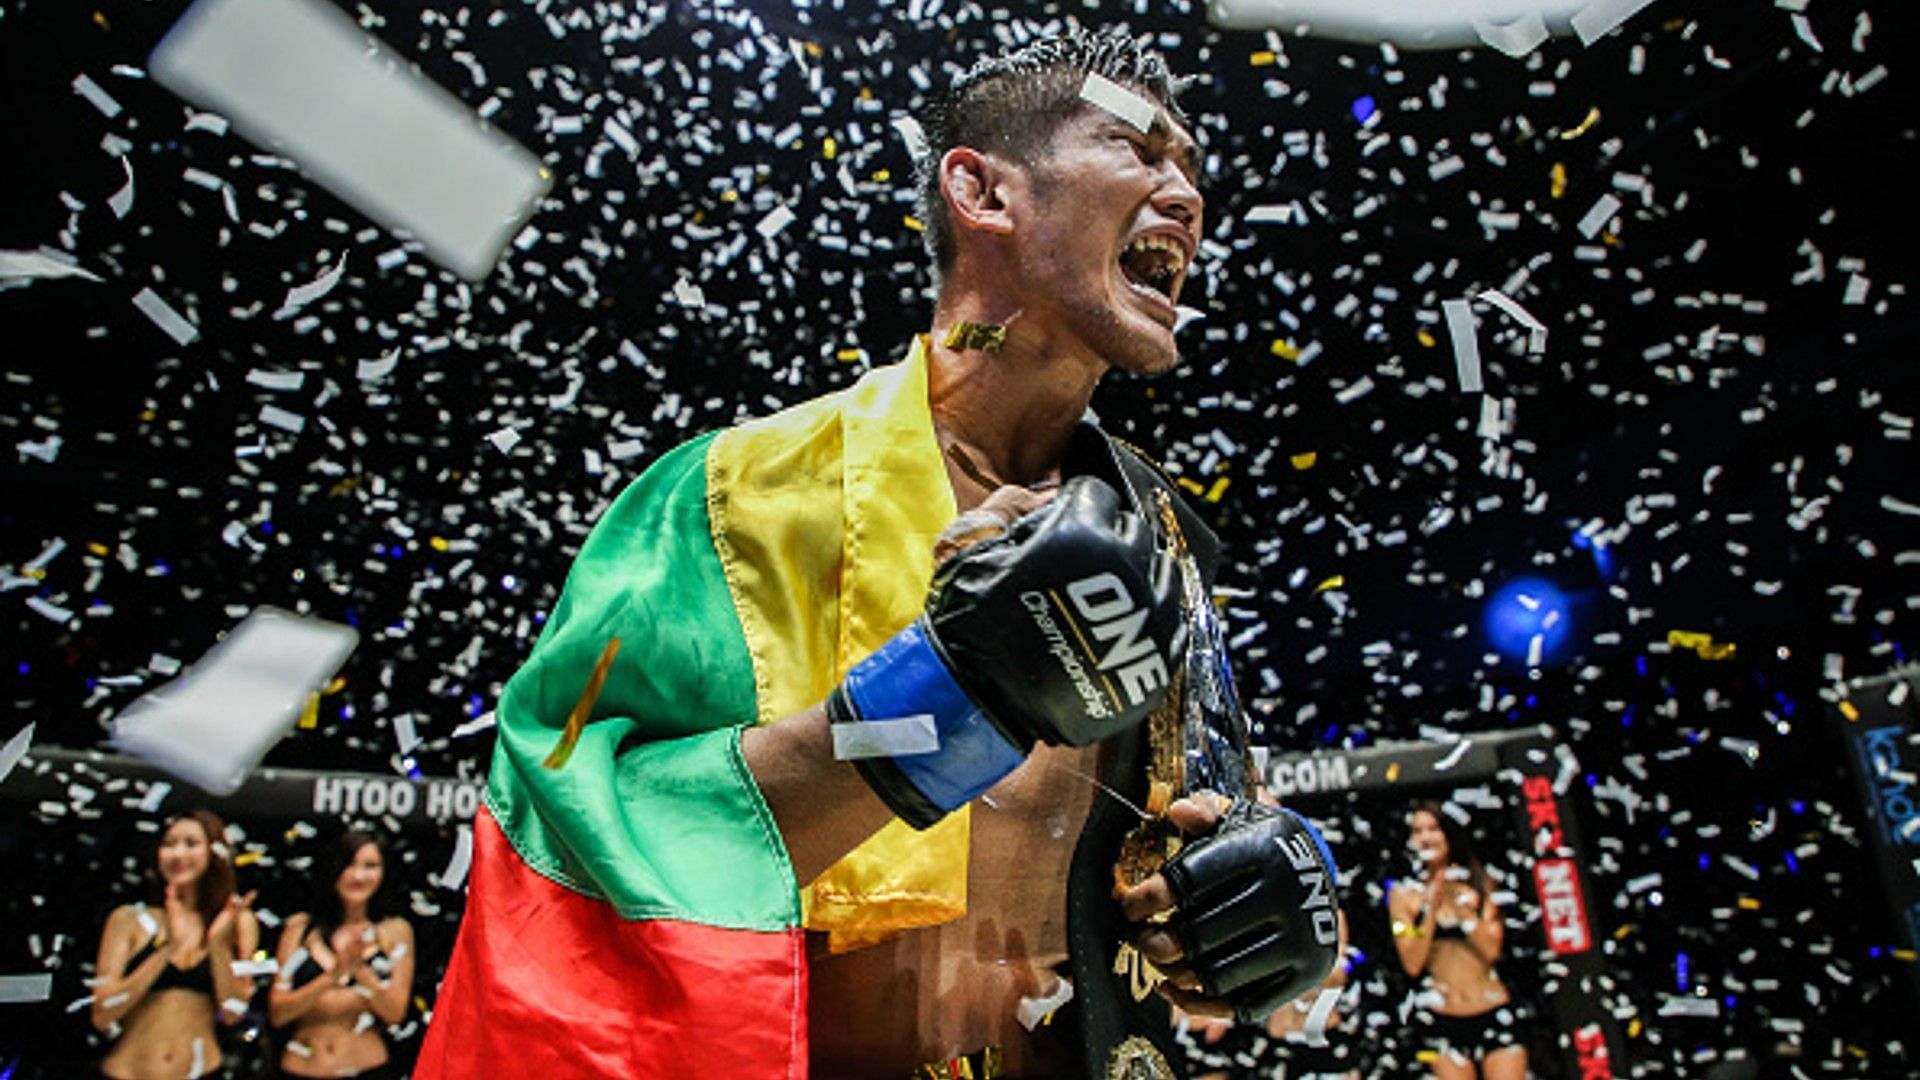 Aung La N Sang celebrates his historic title win in 2017